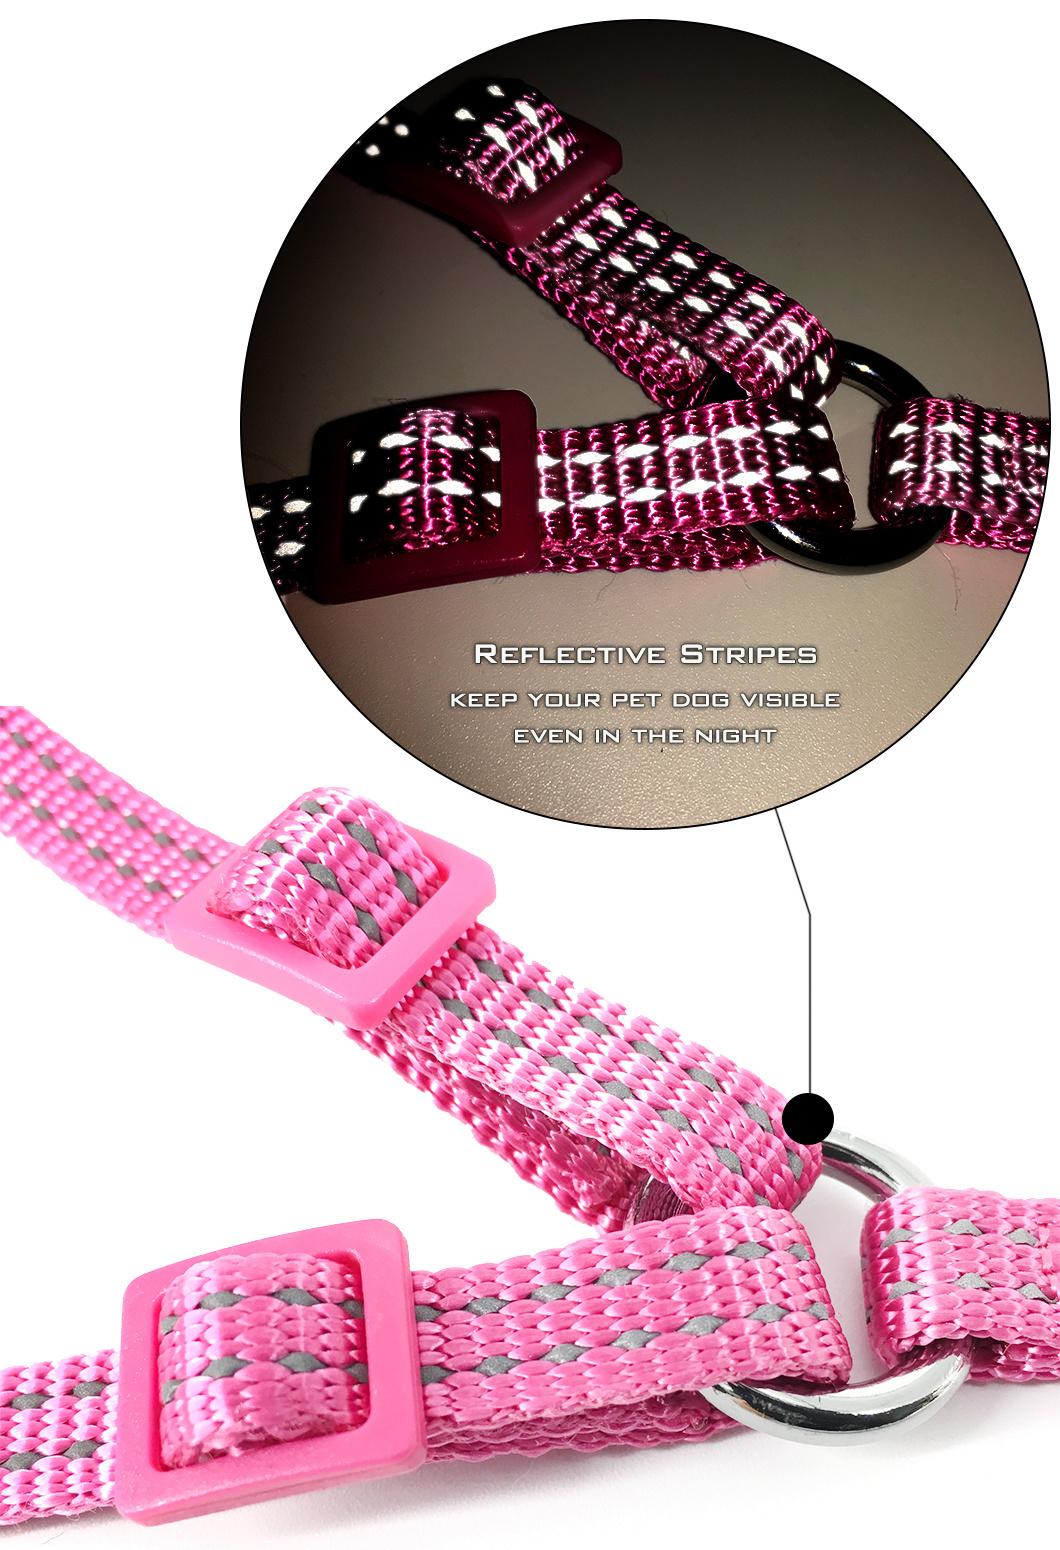 No Pull Adjustable Reflective Lightweight Outdoor Wholesale Dog Harness Pet Accessories